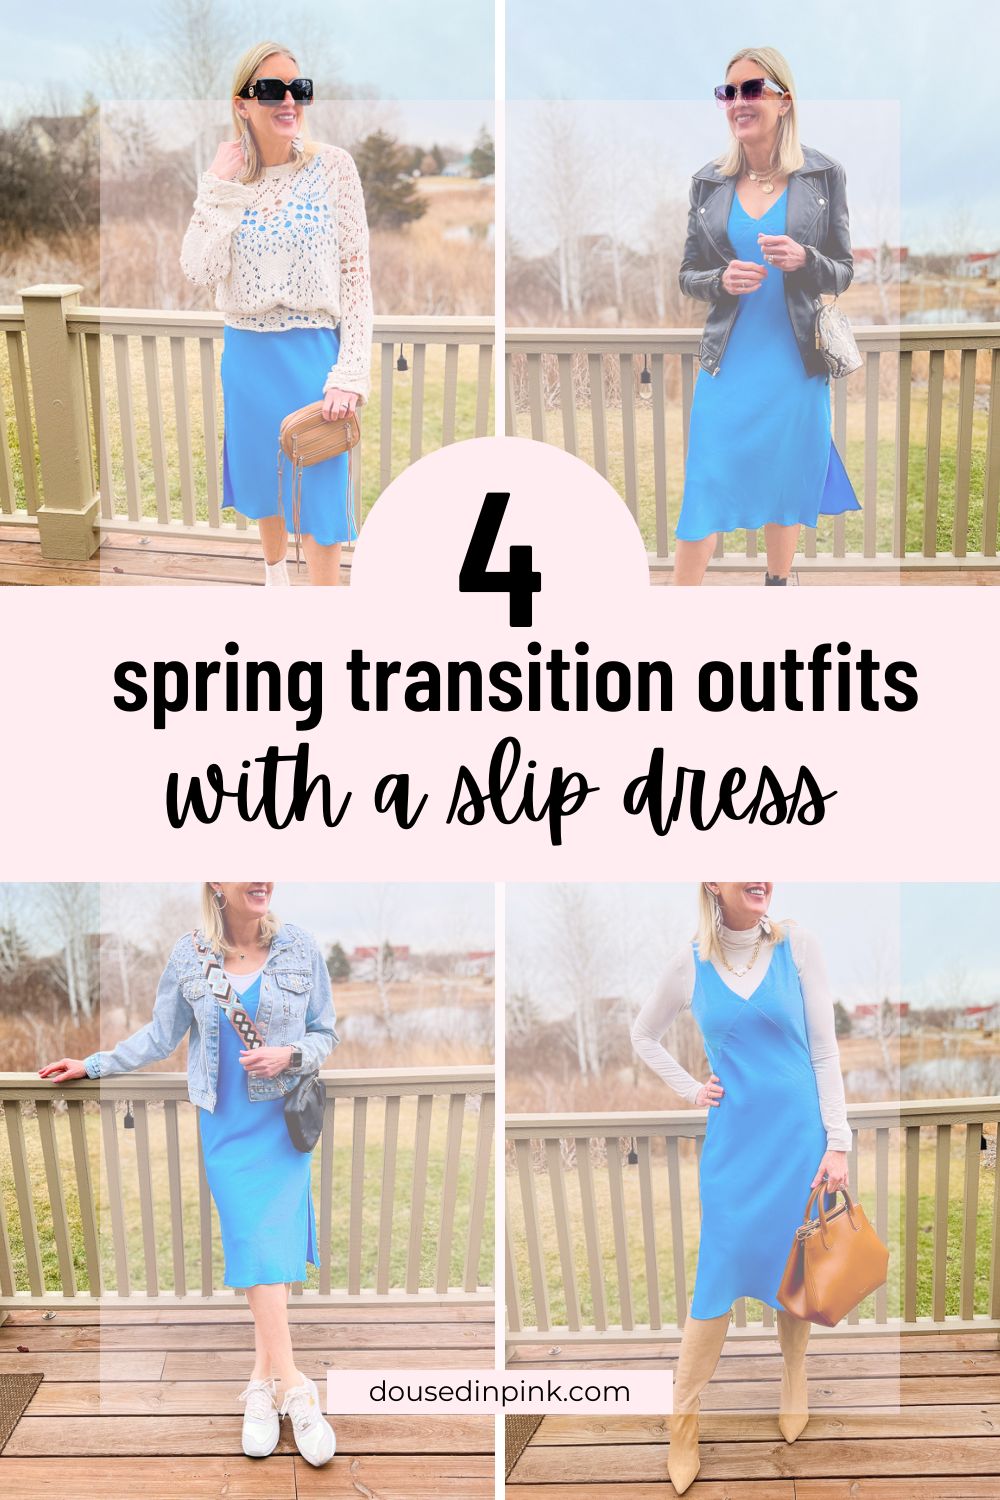 4 spring transition outfits with a slip dress